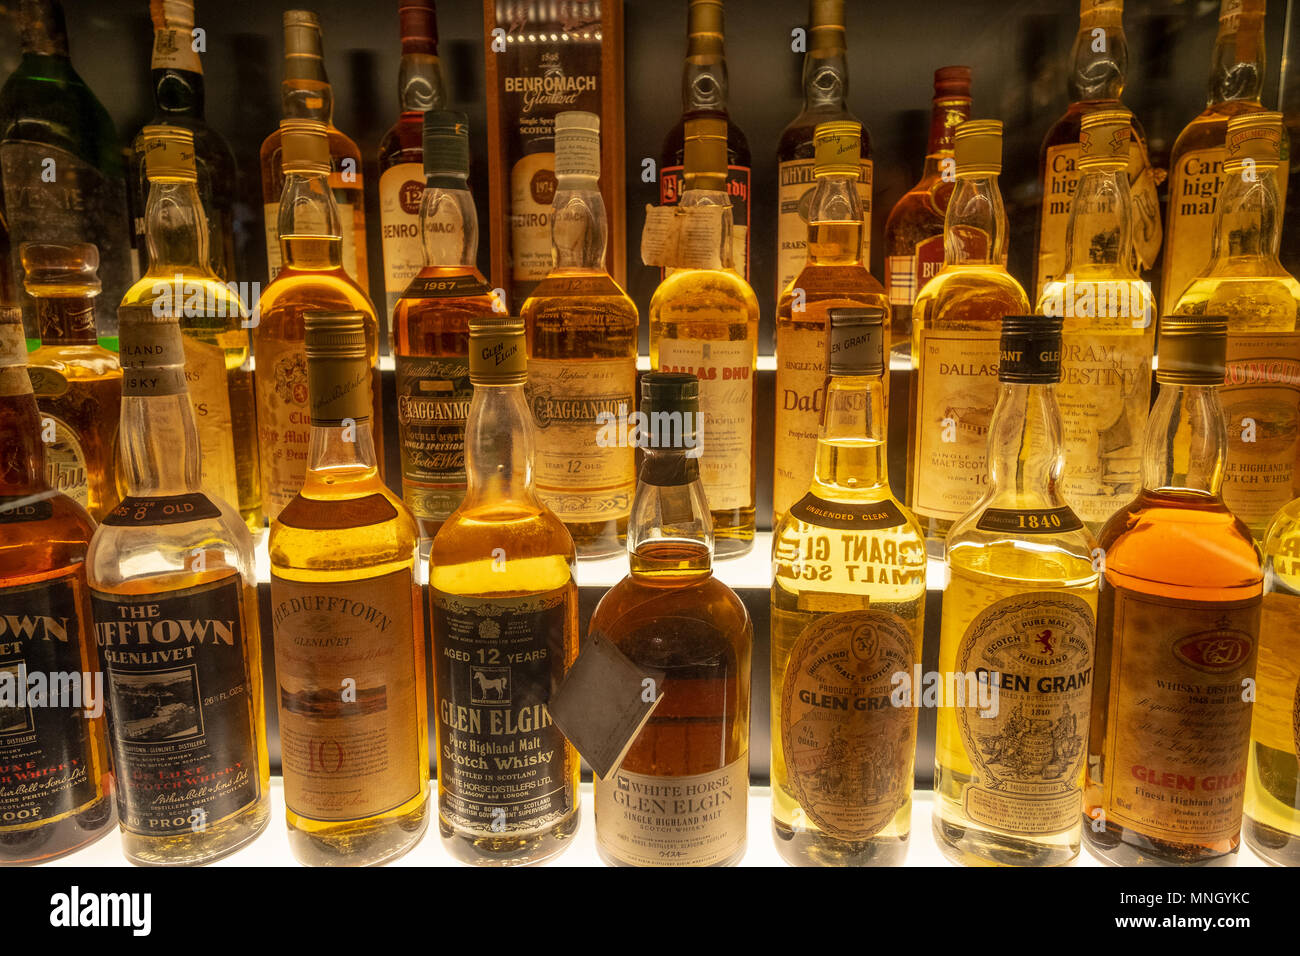 Many bottles of Scotch Whisky on display at the Scotch Whisky Experience visitor centre on the Royal Mile in Edinburgh, Scotland, UK Stock Photo